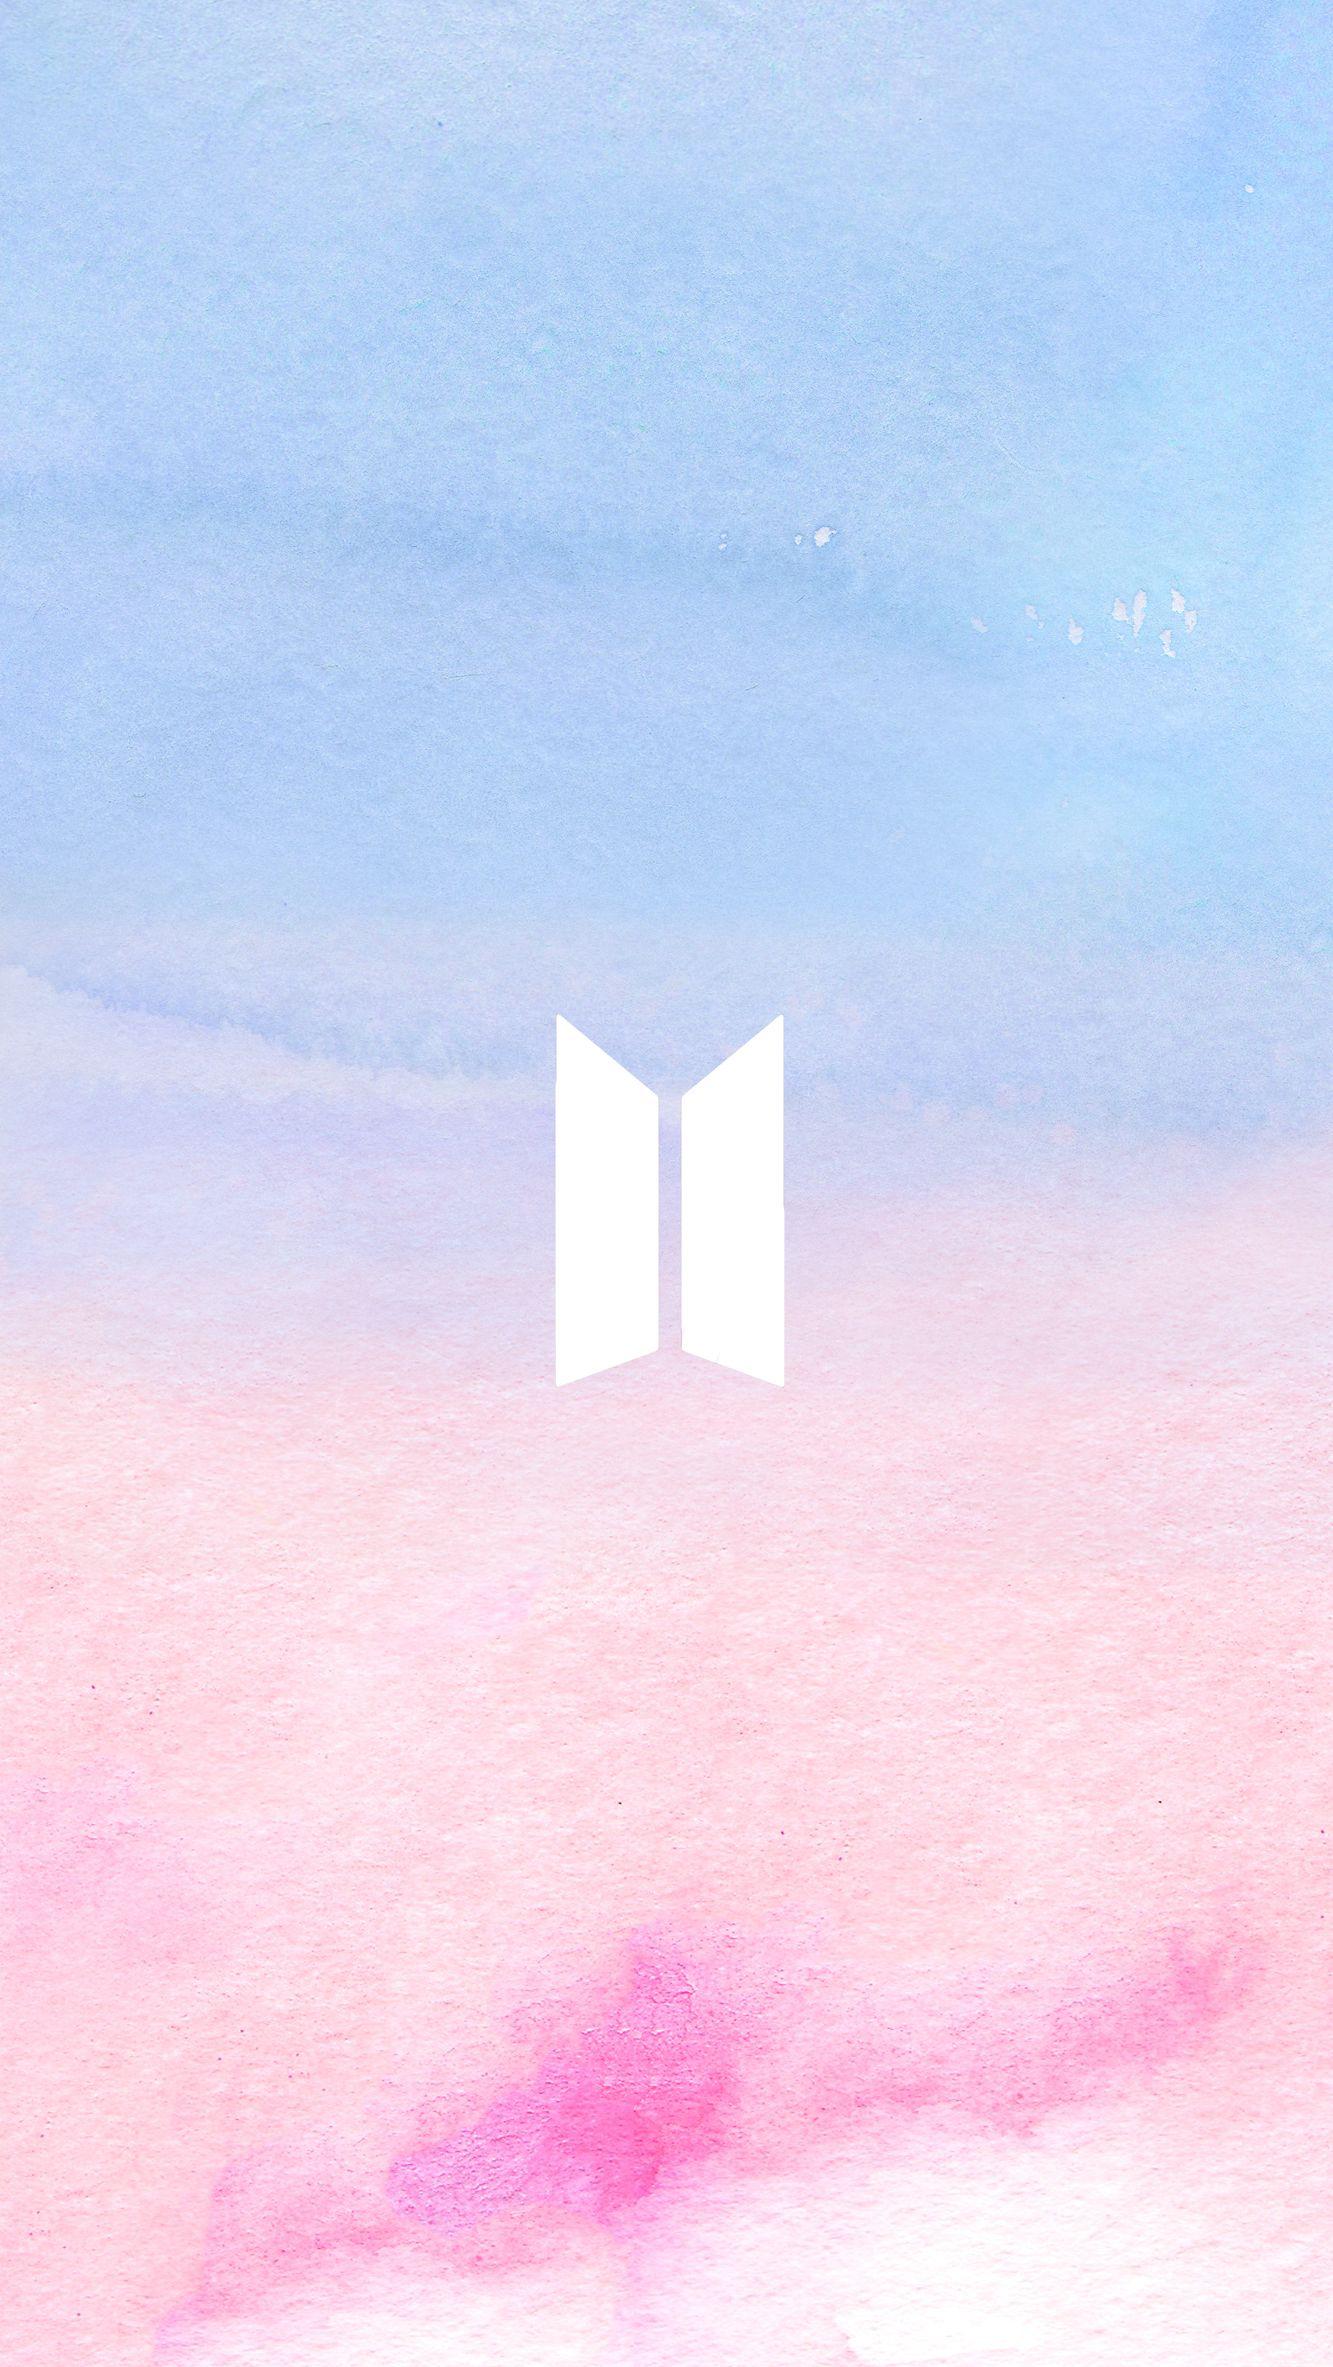 BTS's symbol over a pink and blue watercolor background. K